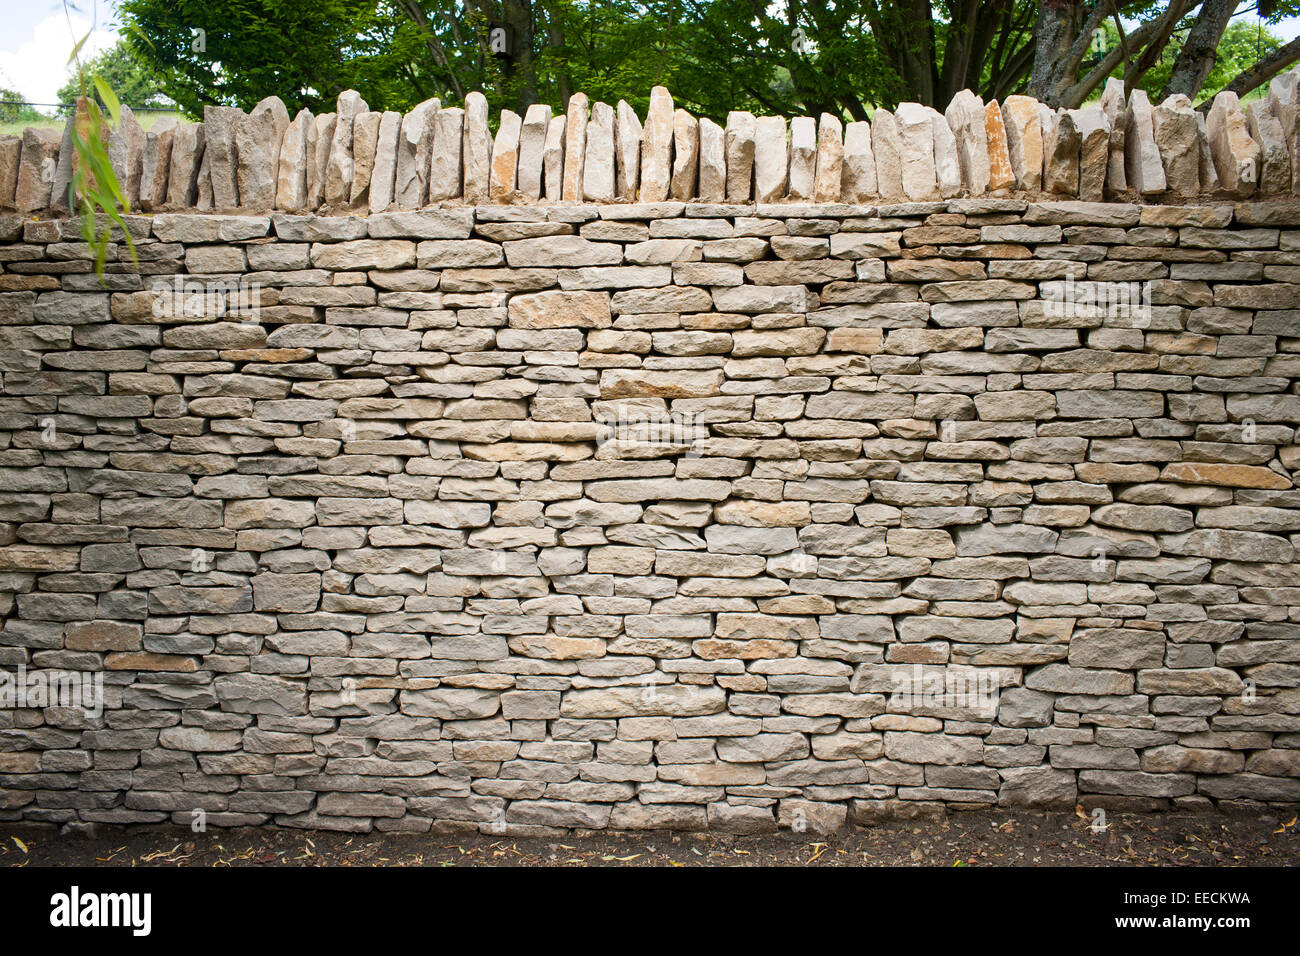 Newly built dry stone wall - drystone - constructed of new Cotswolds stone using traditional old methods, UK Stock Photo